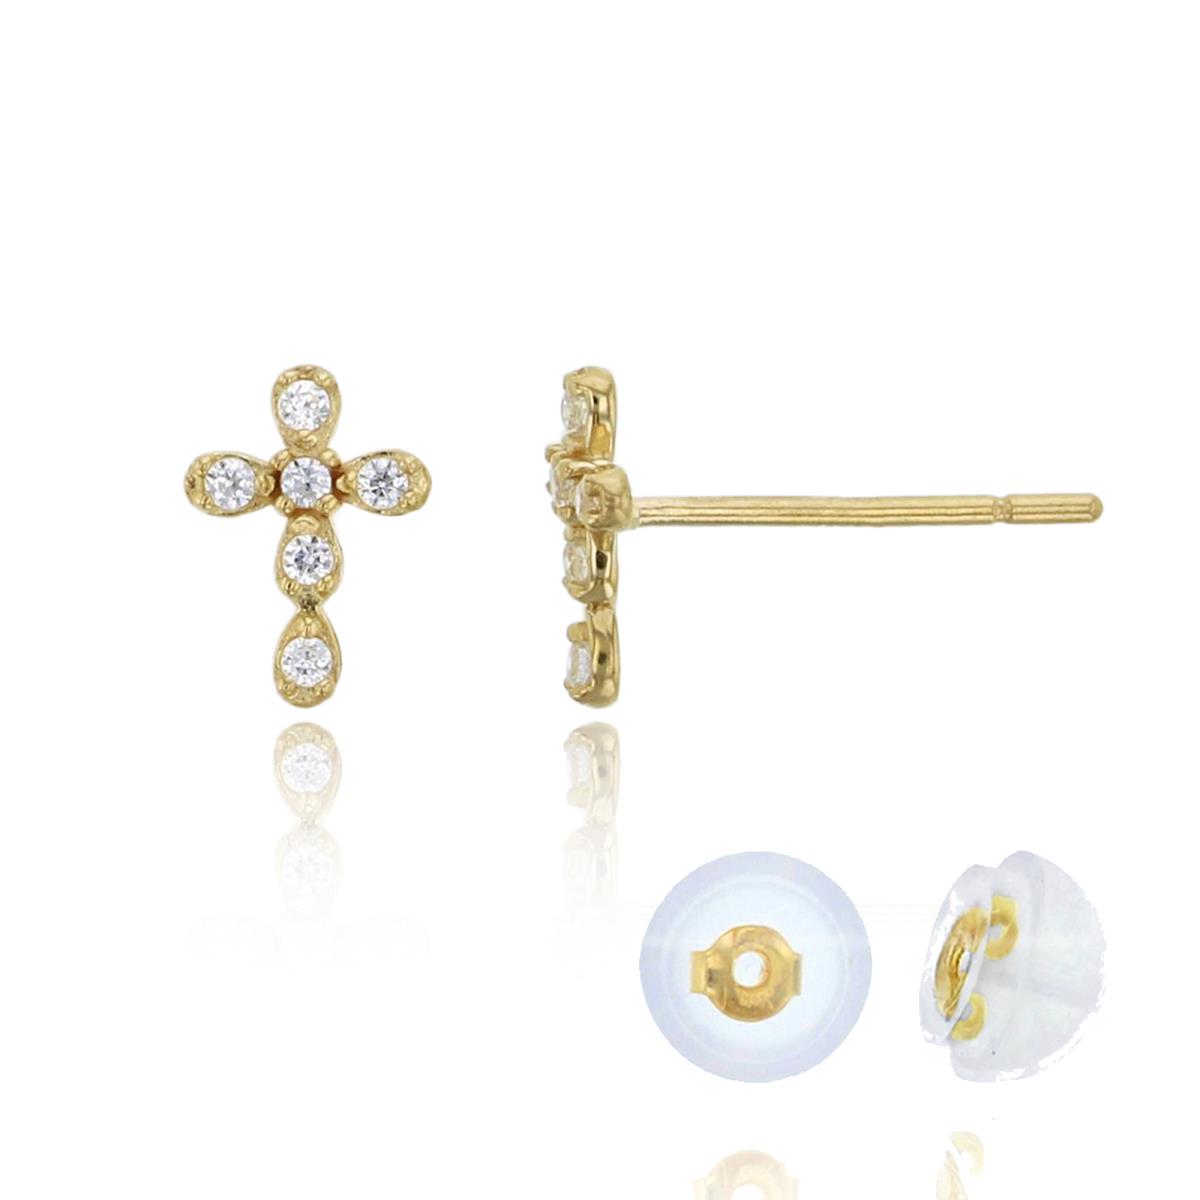 10K Yellow Gold Pave 6x4mm Cross CZ Stud Earring & 10K Silicone Back